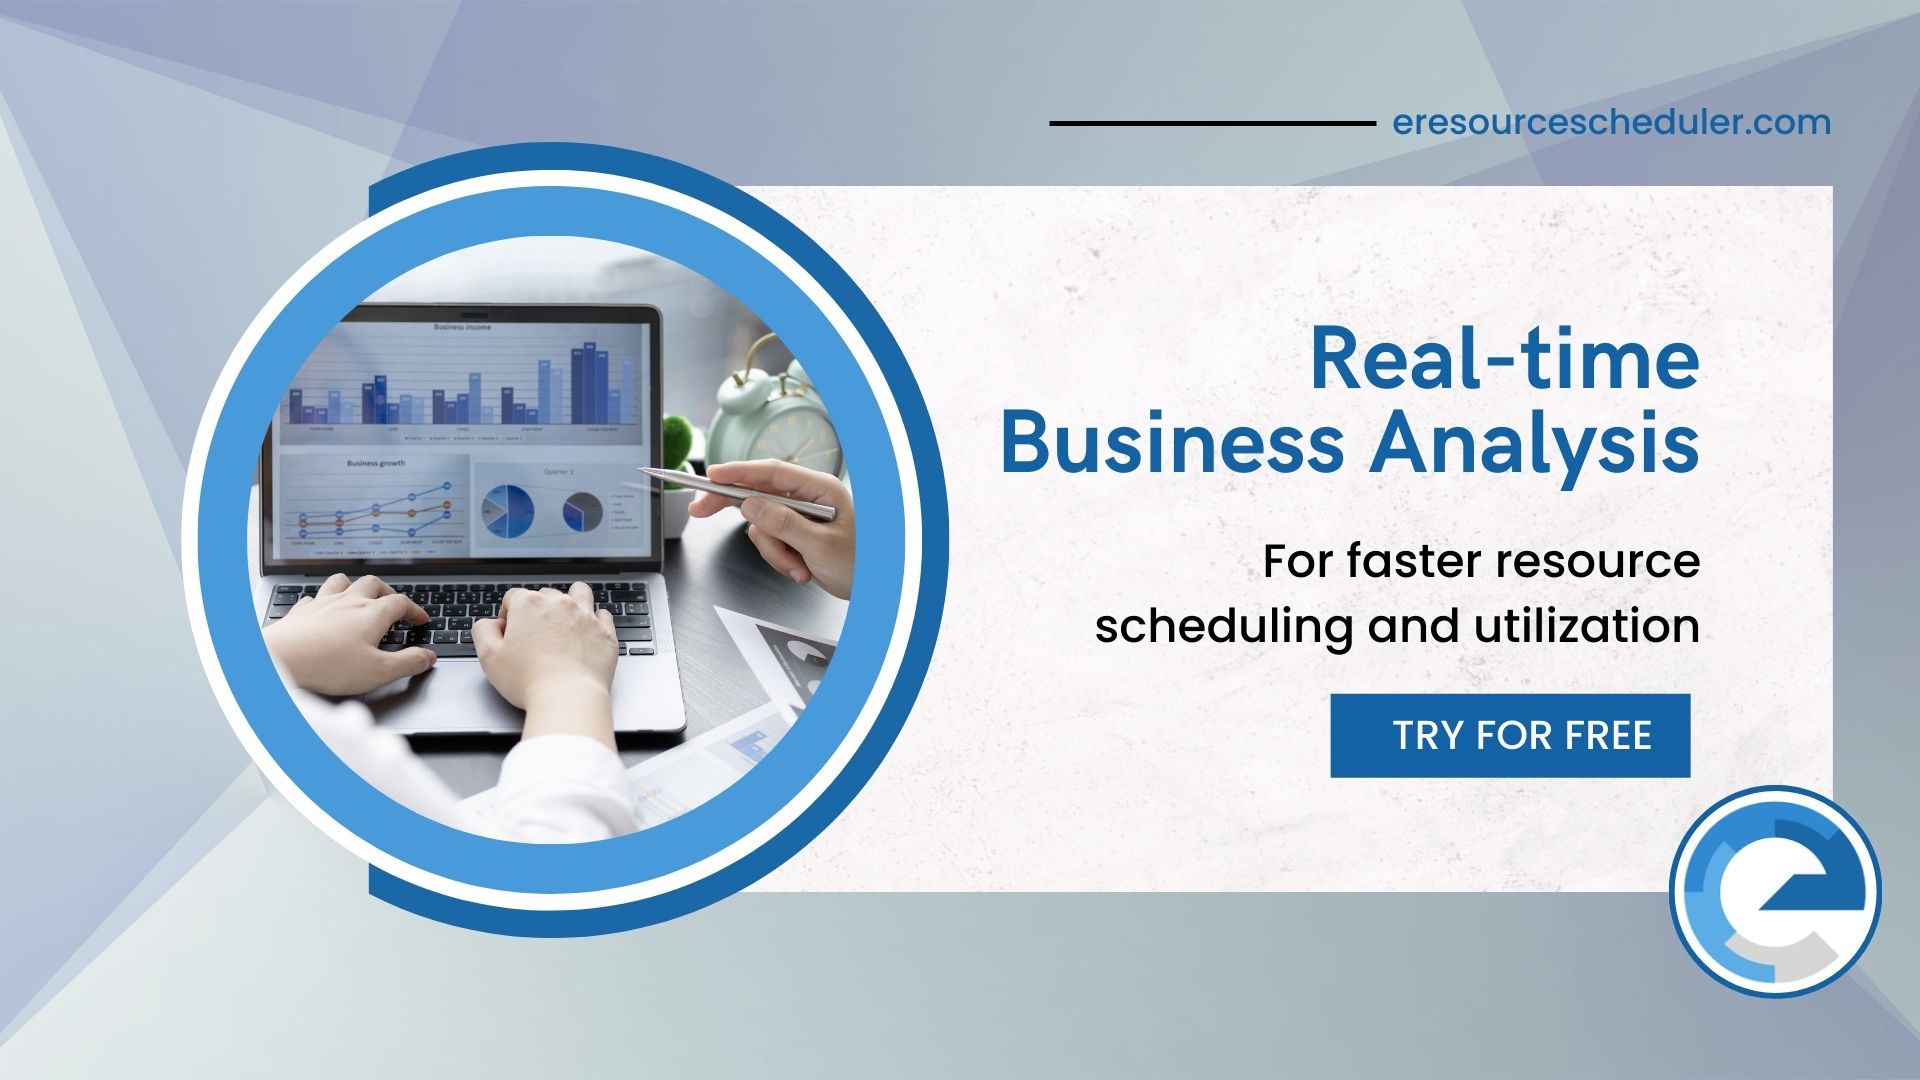 Real-time business analysis